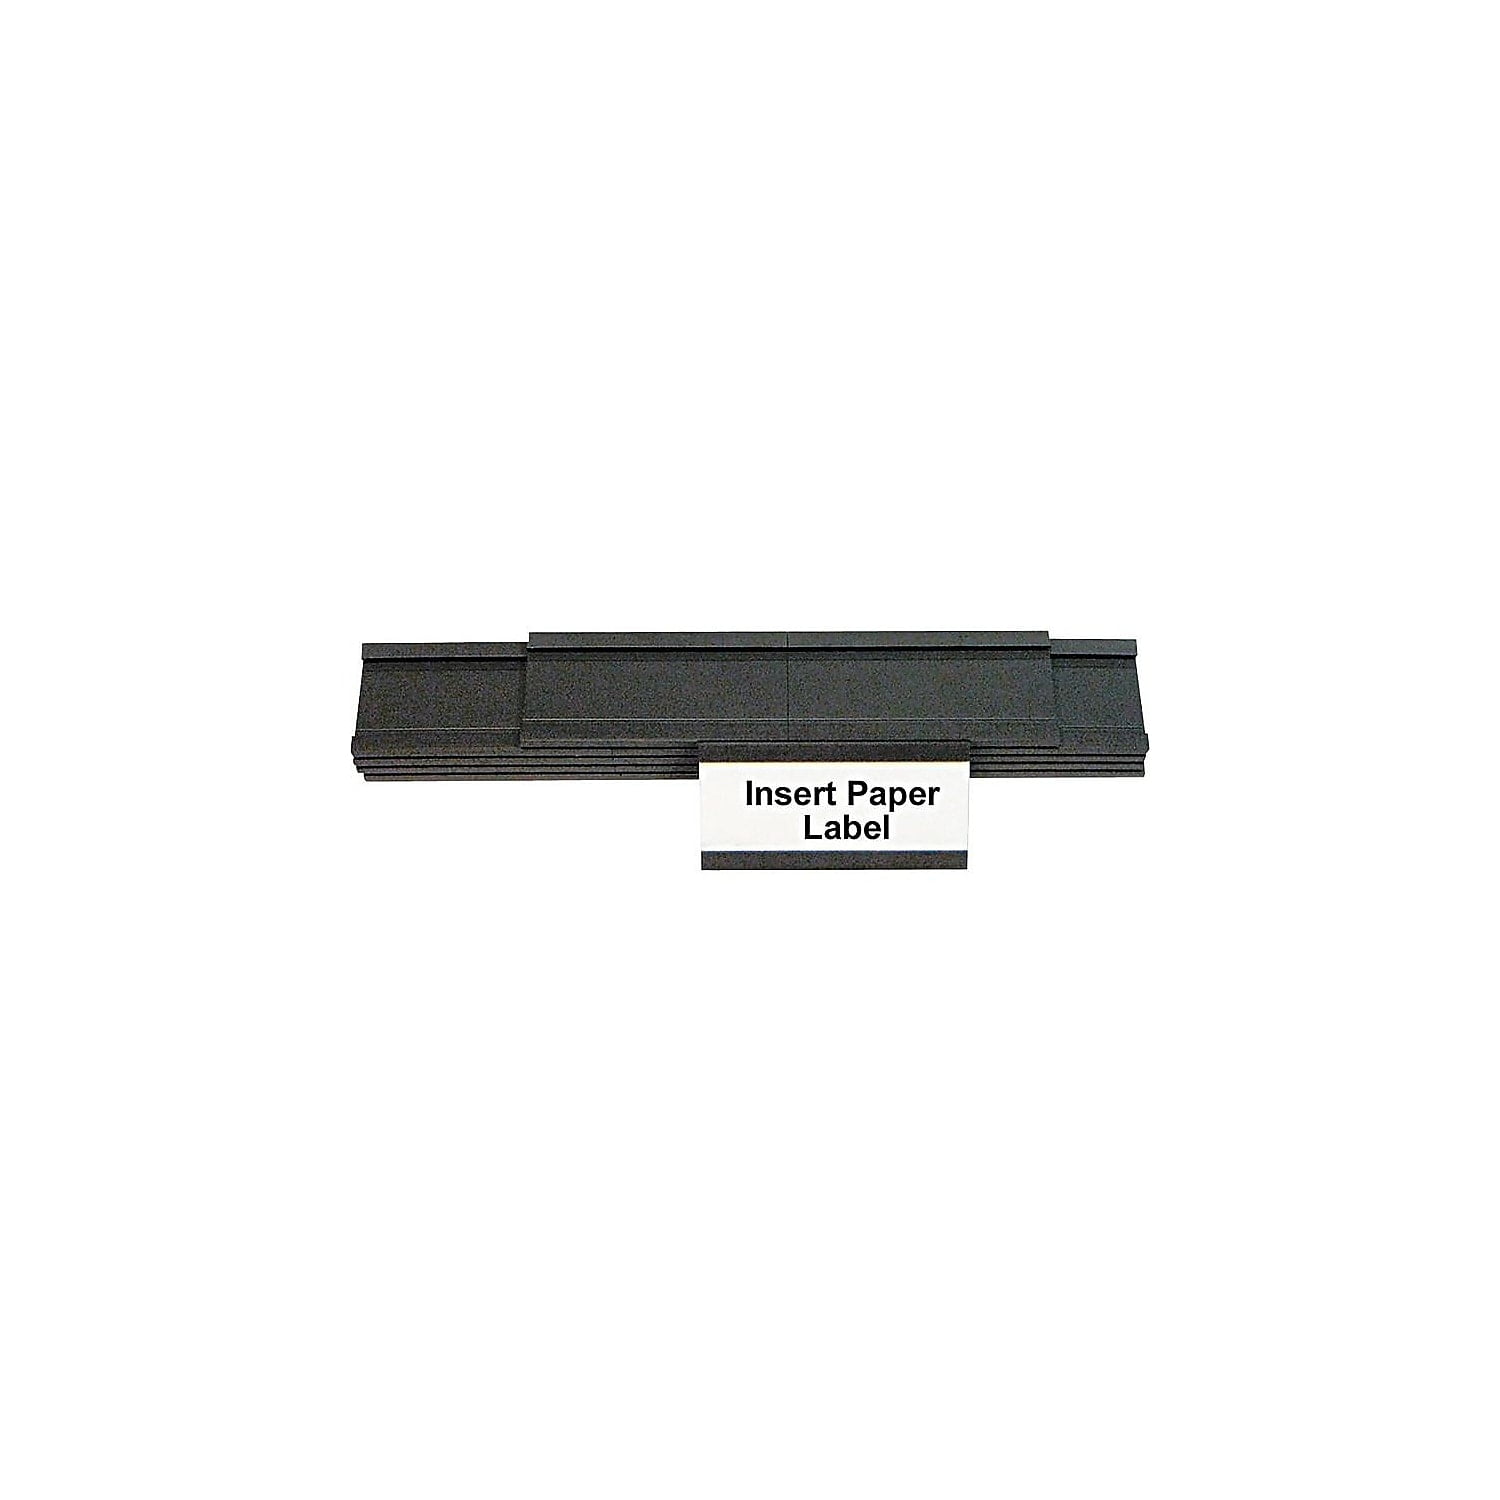 MasterVision 2"x1" Magnetic Data Cards Black  BVCFM1310 25 Pack 